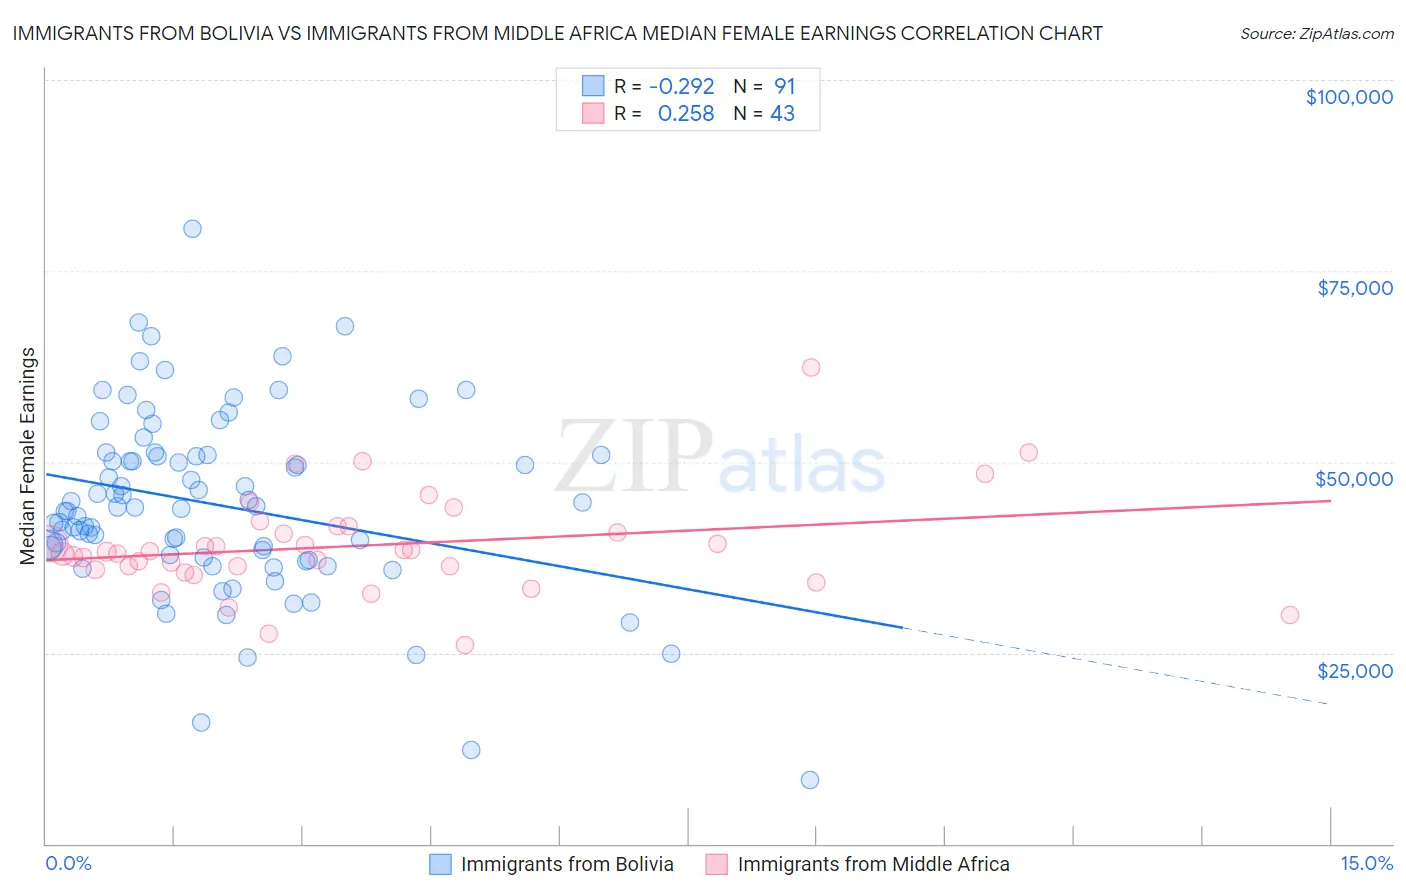 Immigrants from Bolivia vs Immigrants from Middle Africa Median Female Earnings